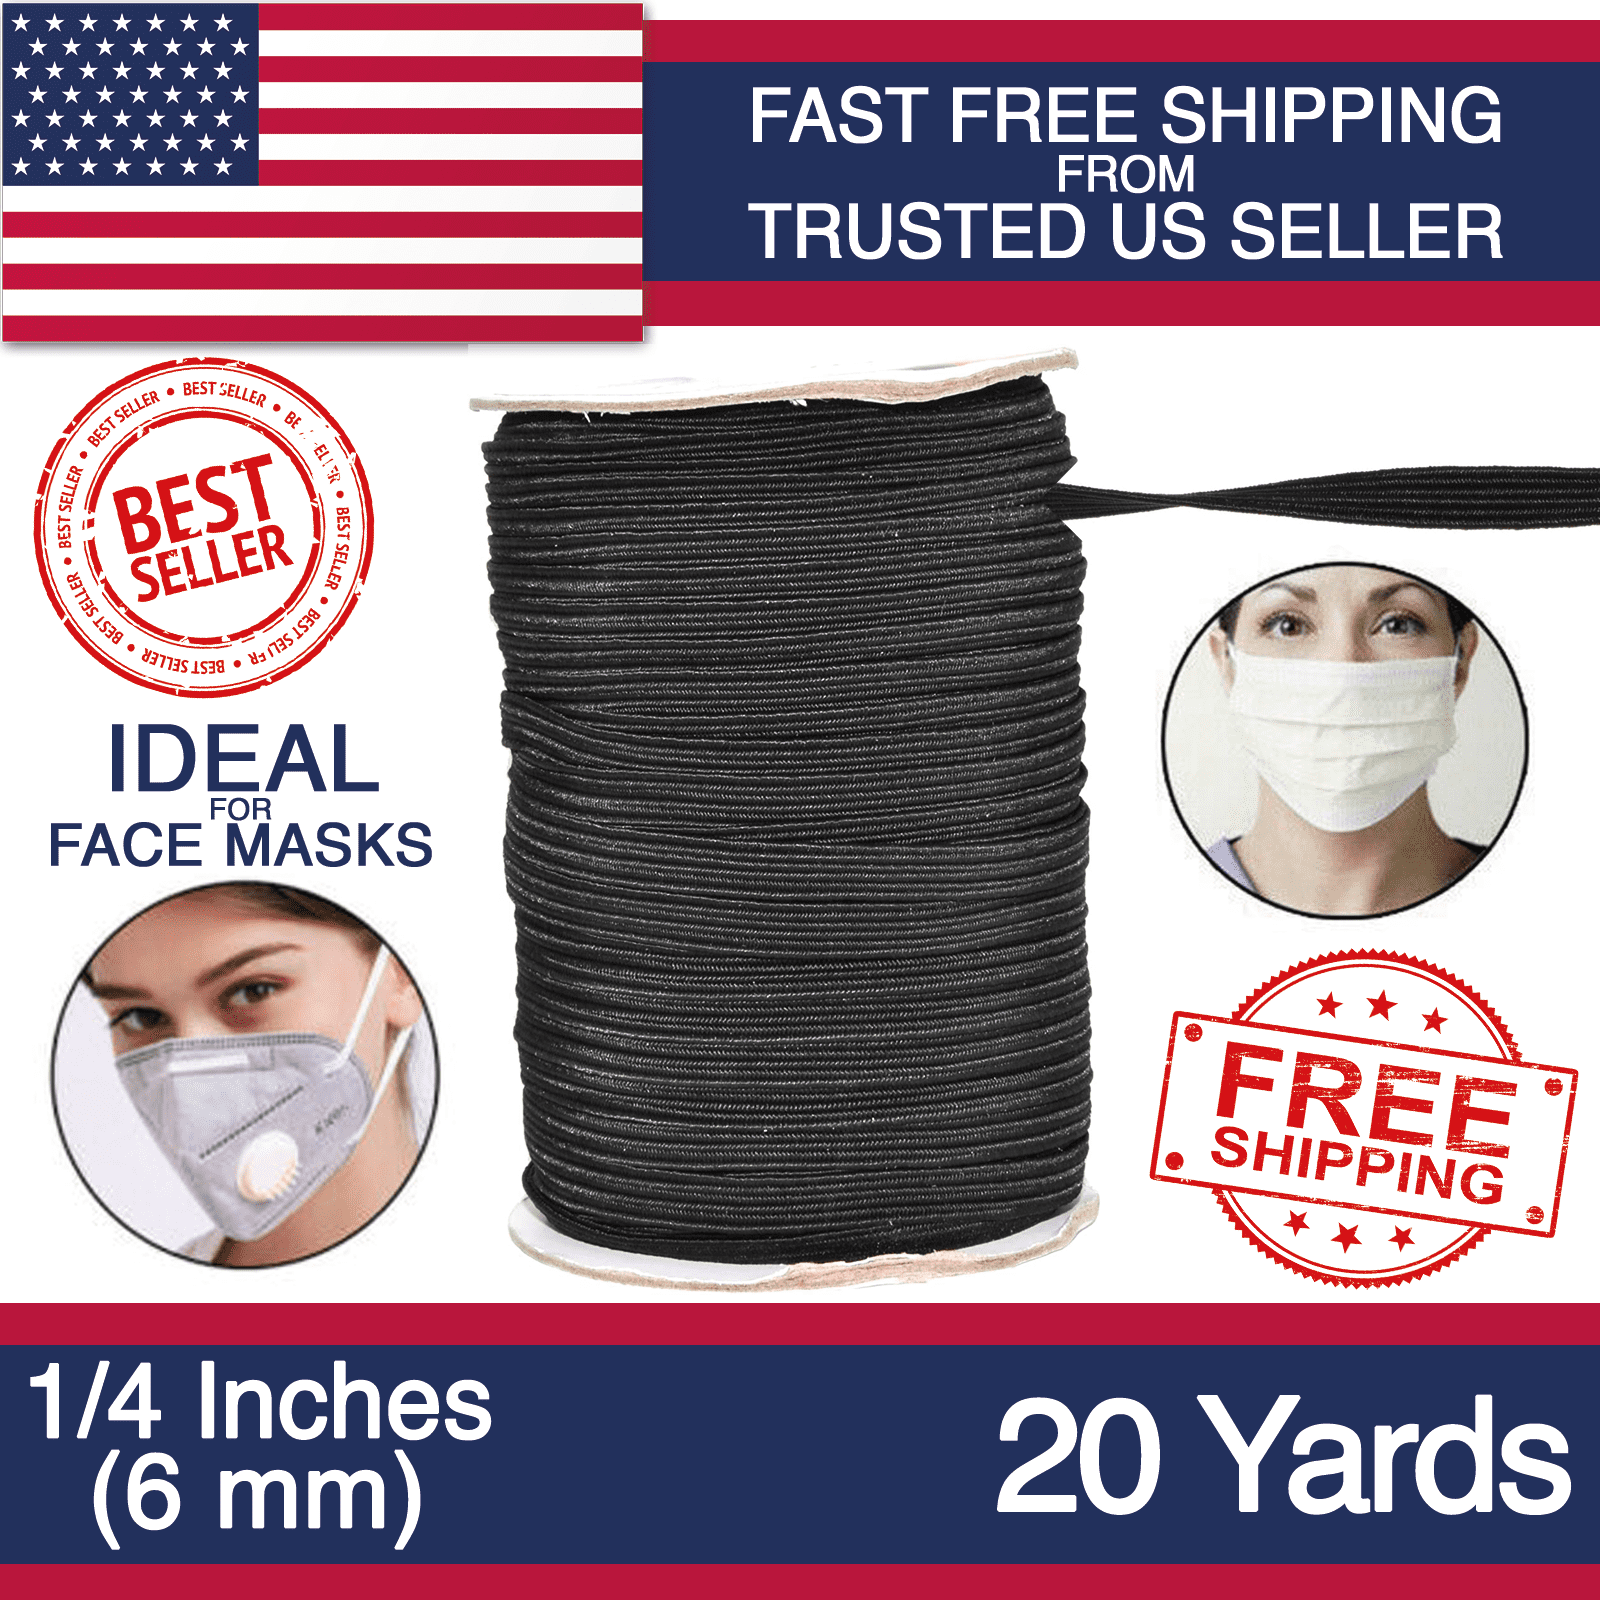 20 YARDS Flat Elastic 1/4 Inch Knit White FAST FREE SHIPPING Same or Next Day